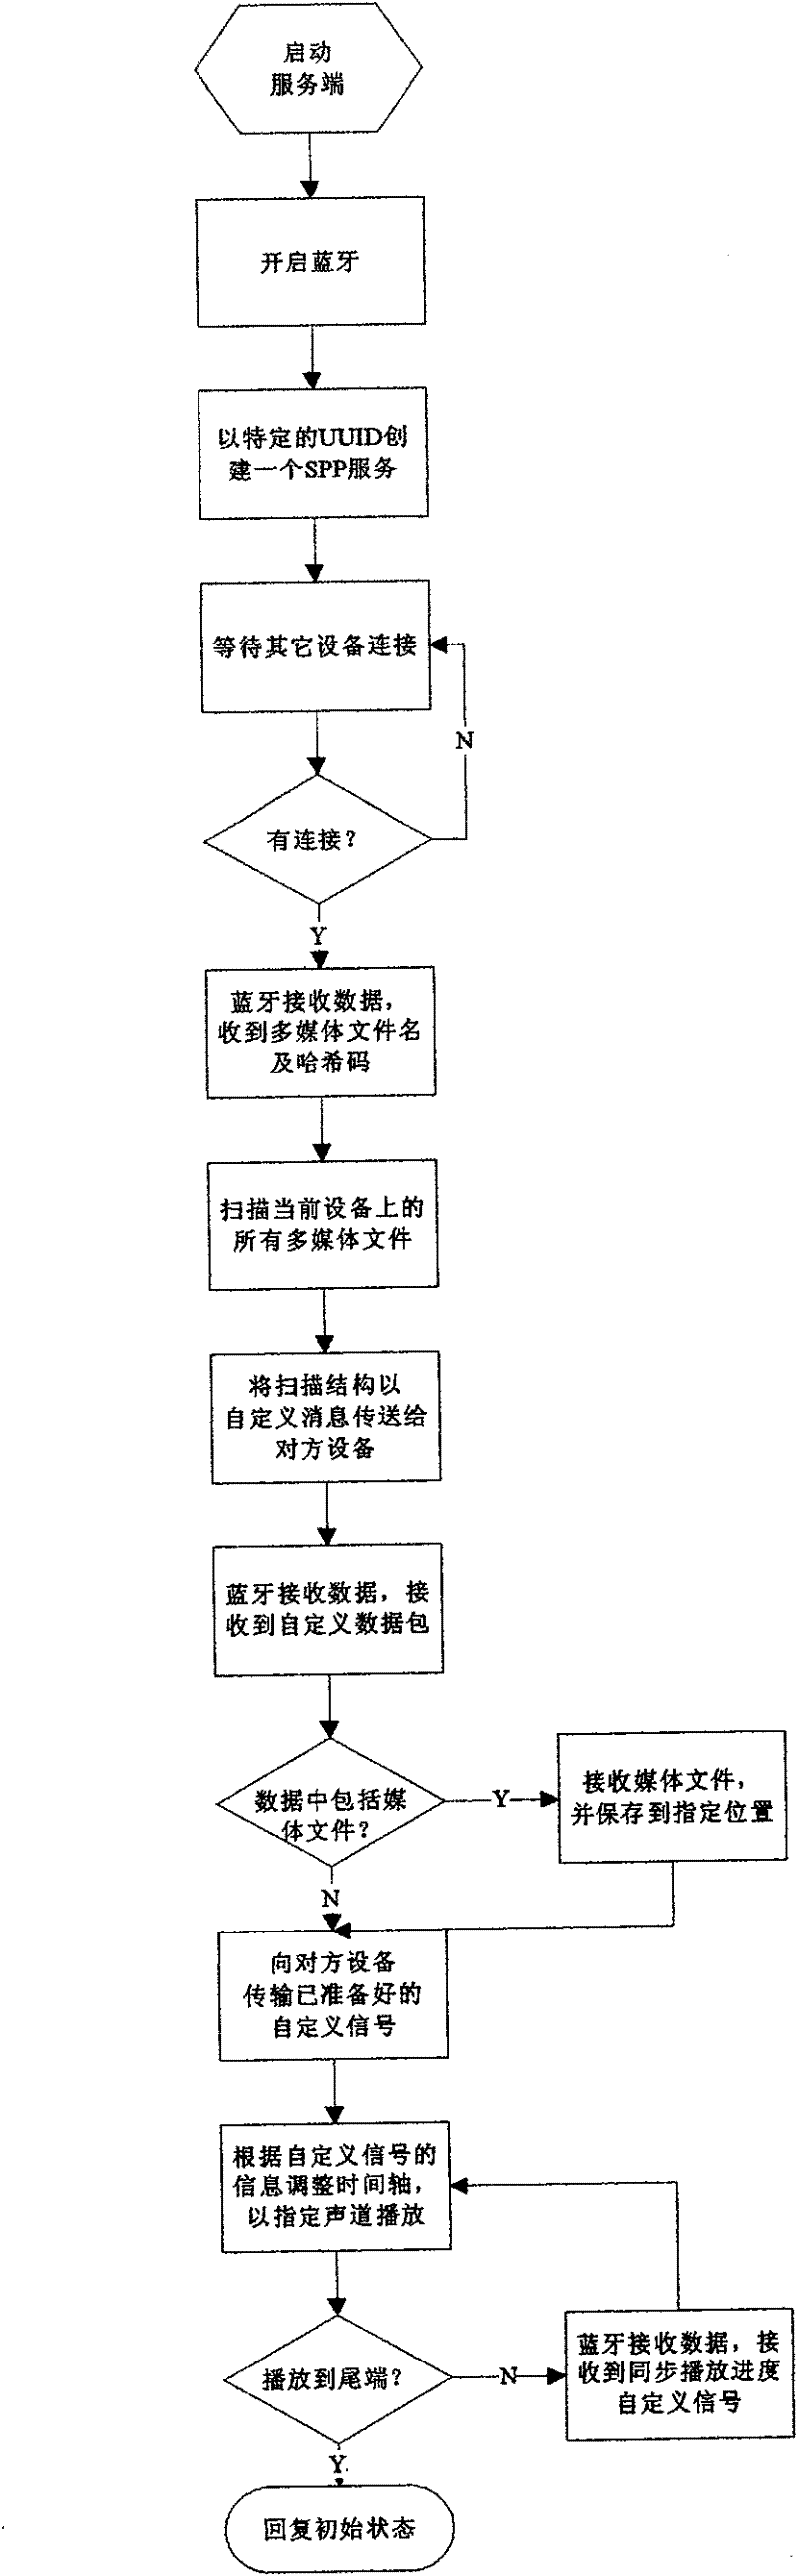 Realization system and method for split-type multi-channel synchronous play for multimedia file based on wireless transmission technology